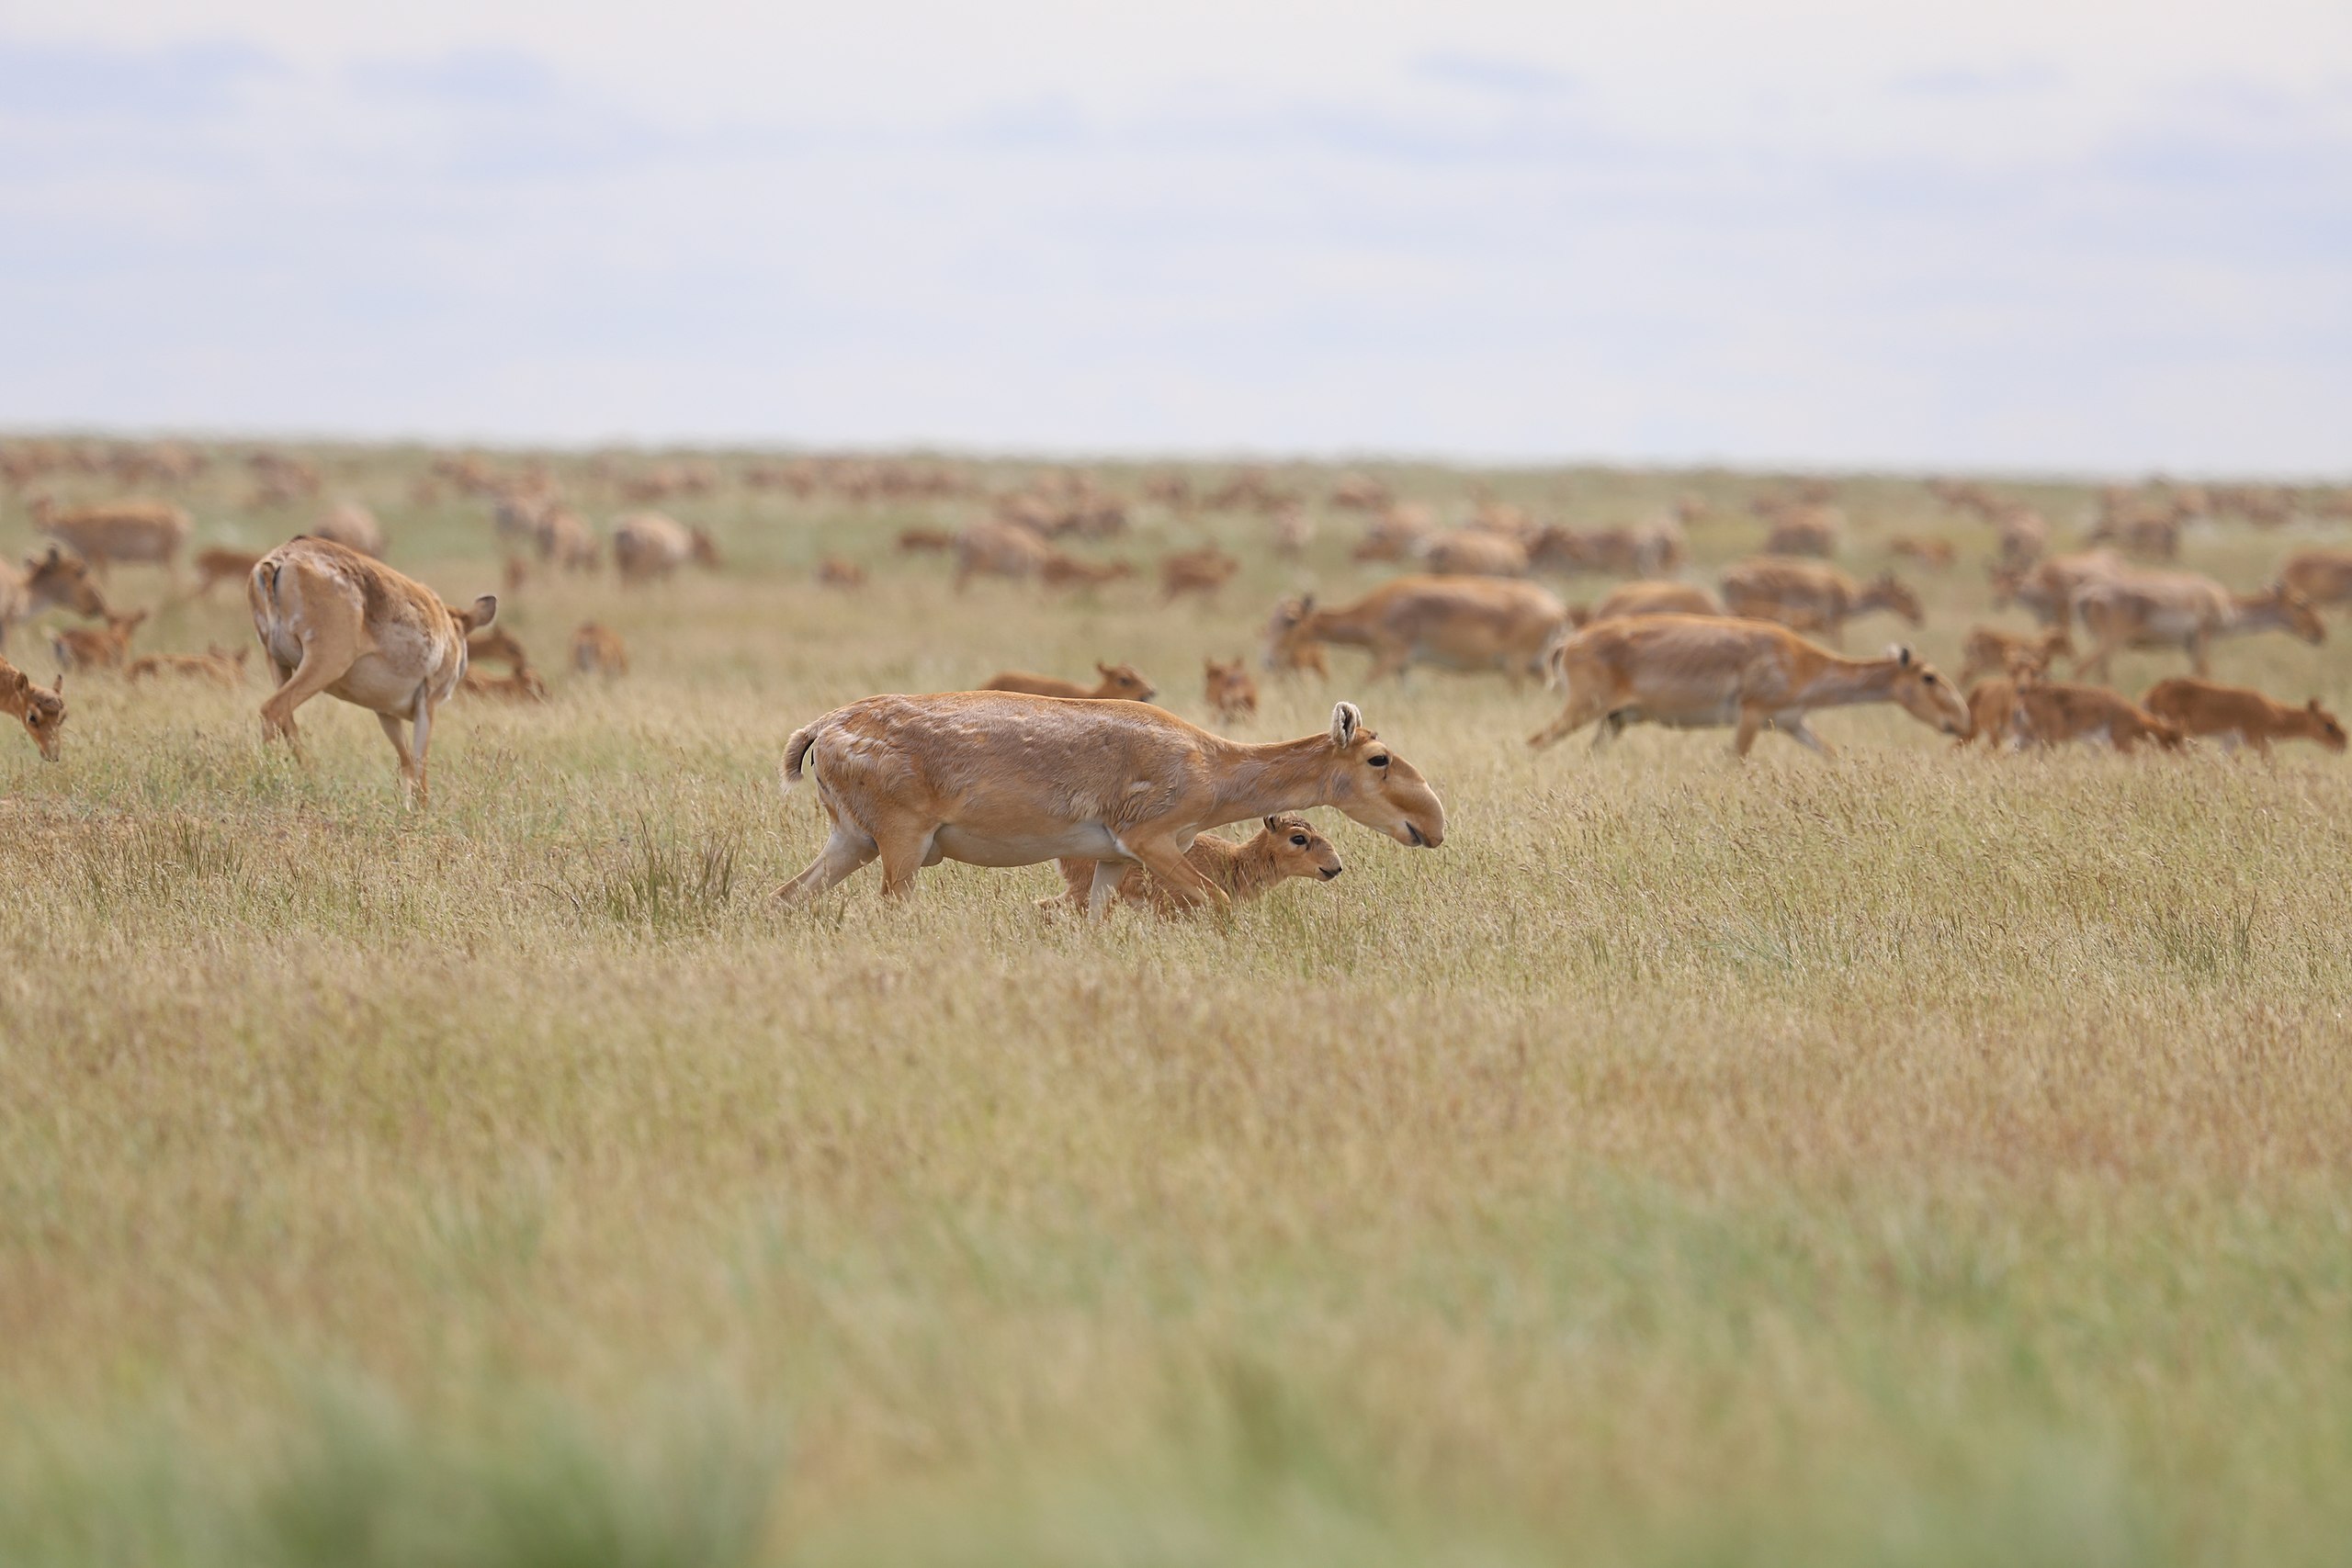 Photograph showing saiga on the steppe of Kazakhstan. The saiga are a type of antelope. The stand on four tall legs and have short ears and tails. Their noses appear curved.